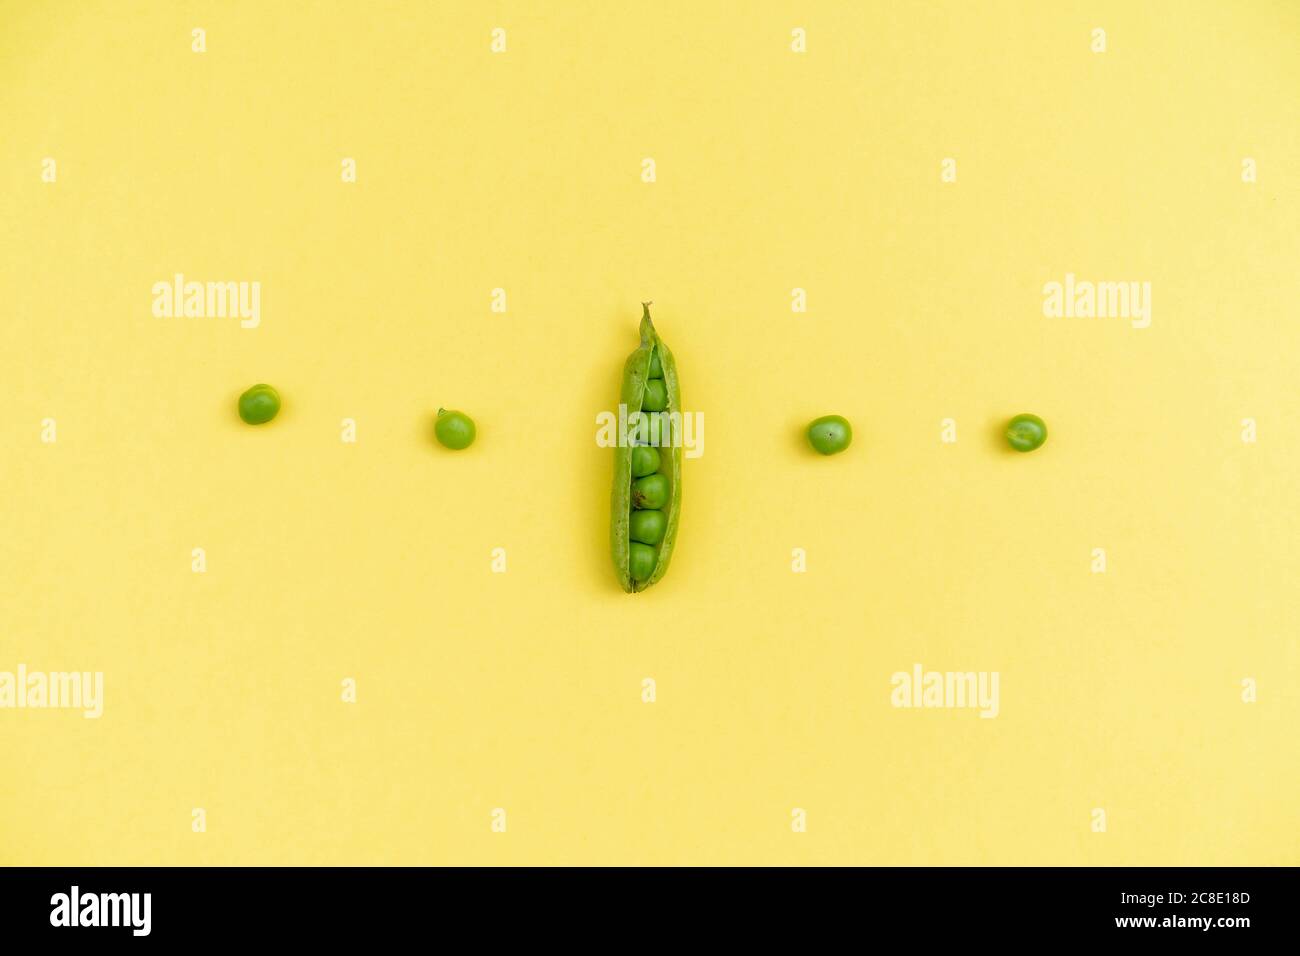 Studio shot of row of green peas and single pea pod against yellow background Stock Photo